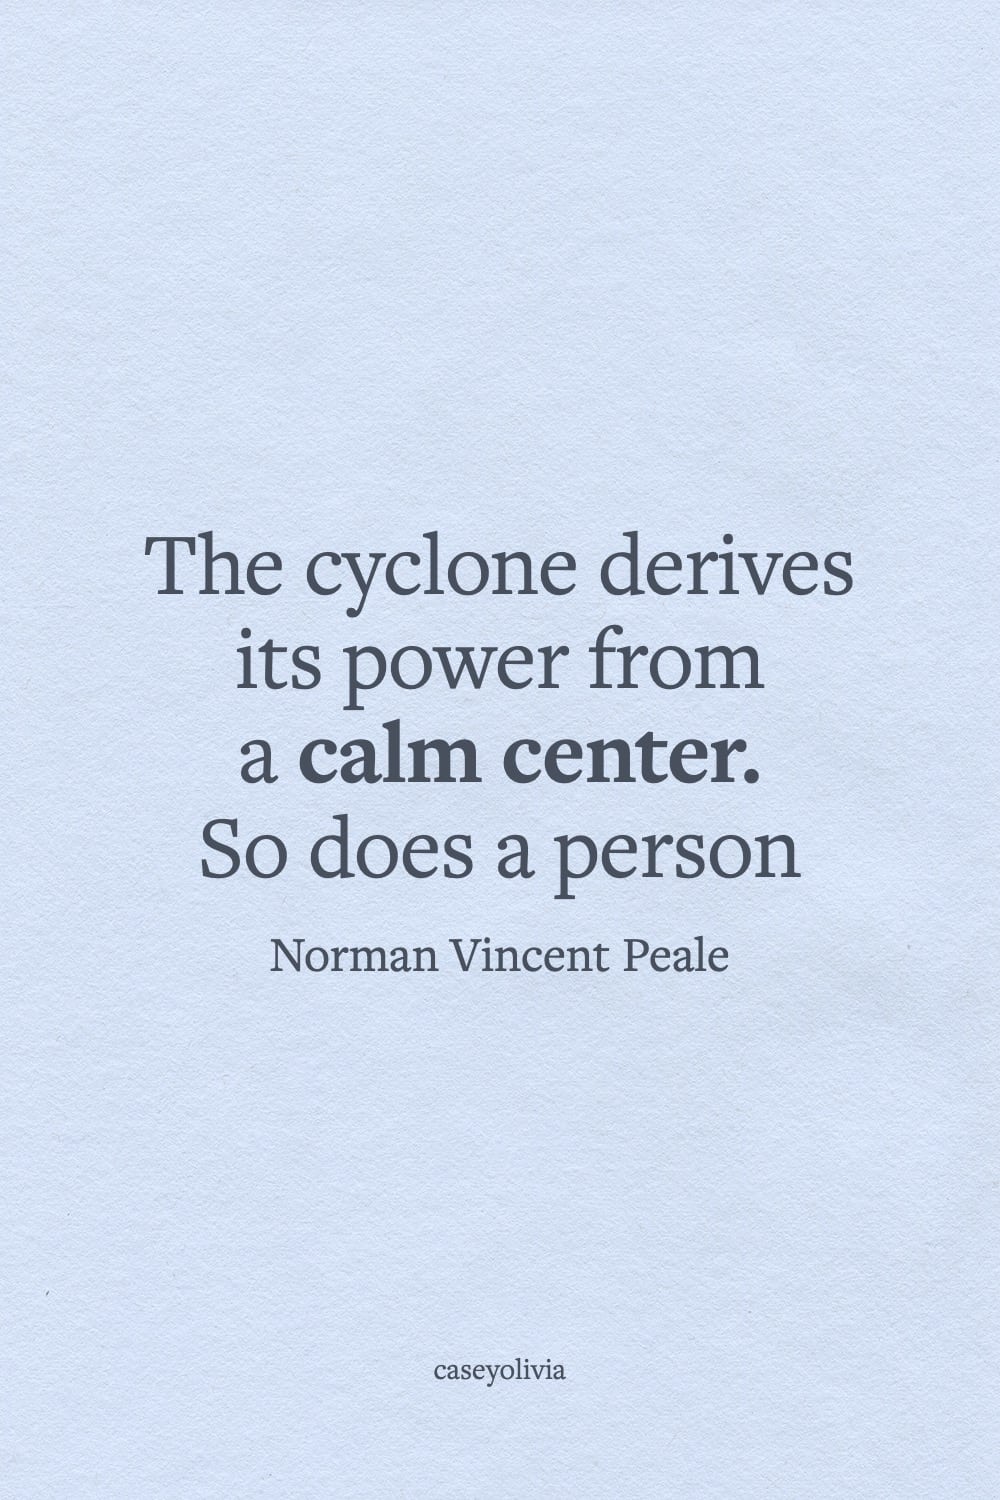 power from a calm center inspirational quote